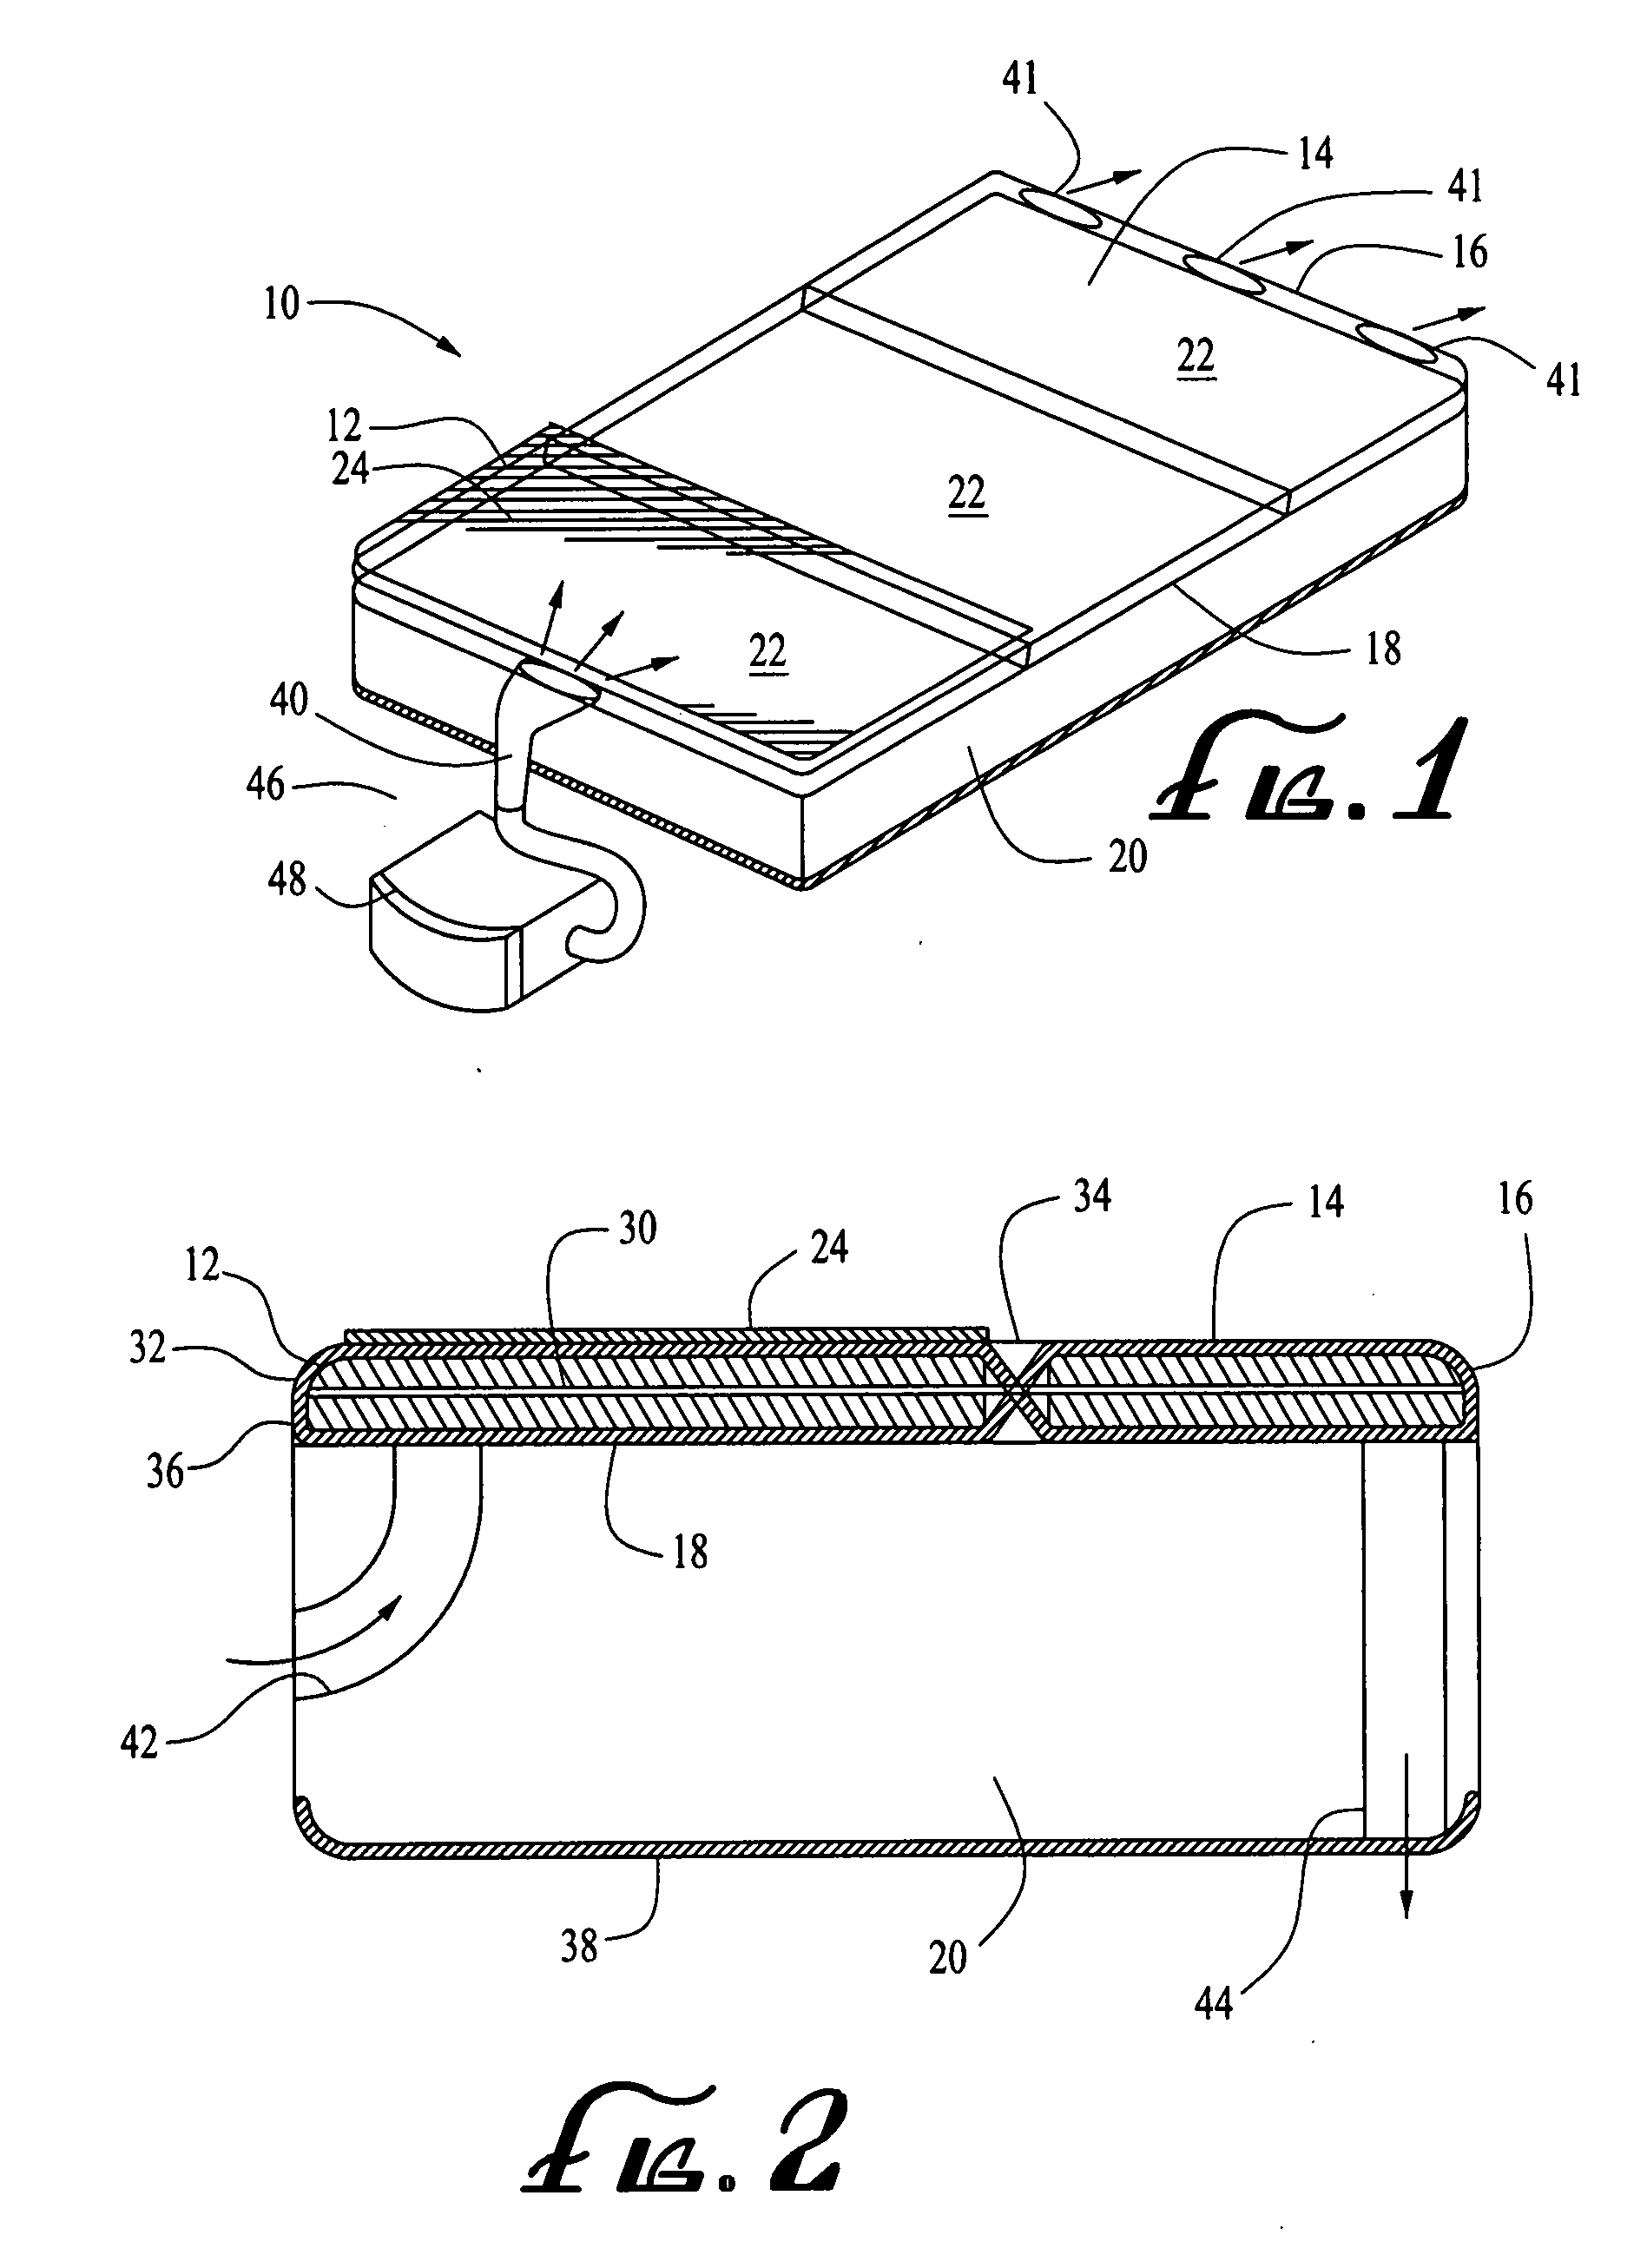 Multiple convective cushion seating and sleeping systems and methods